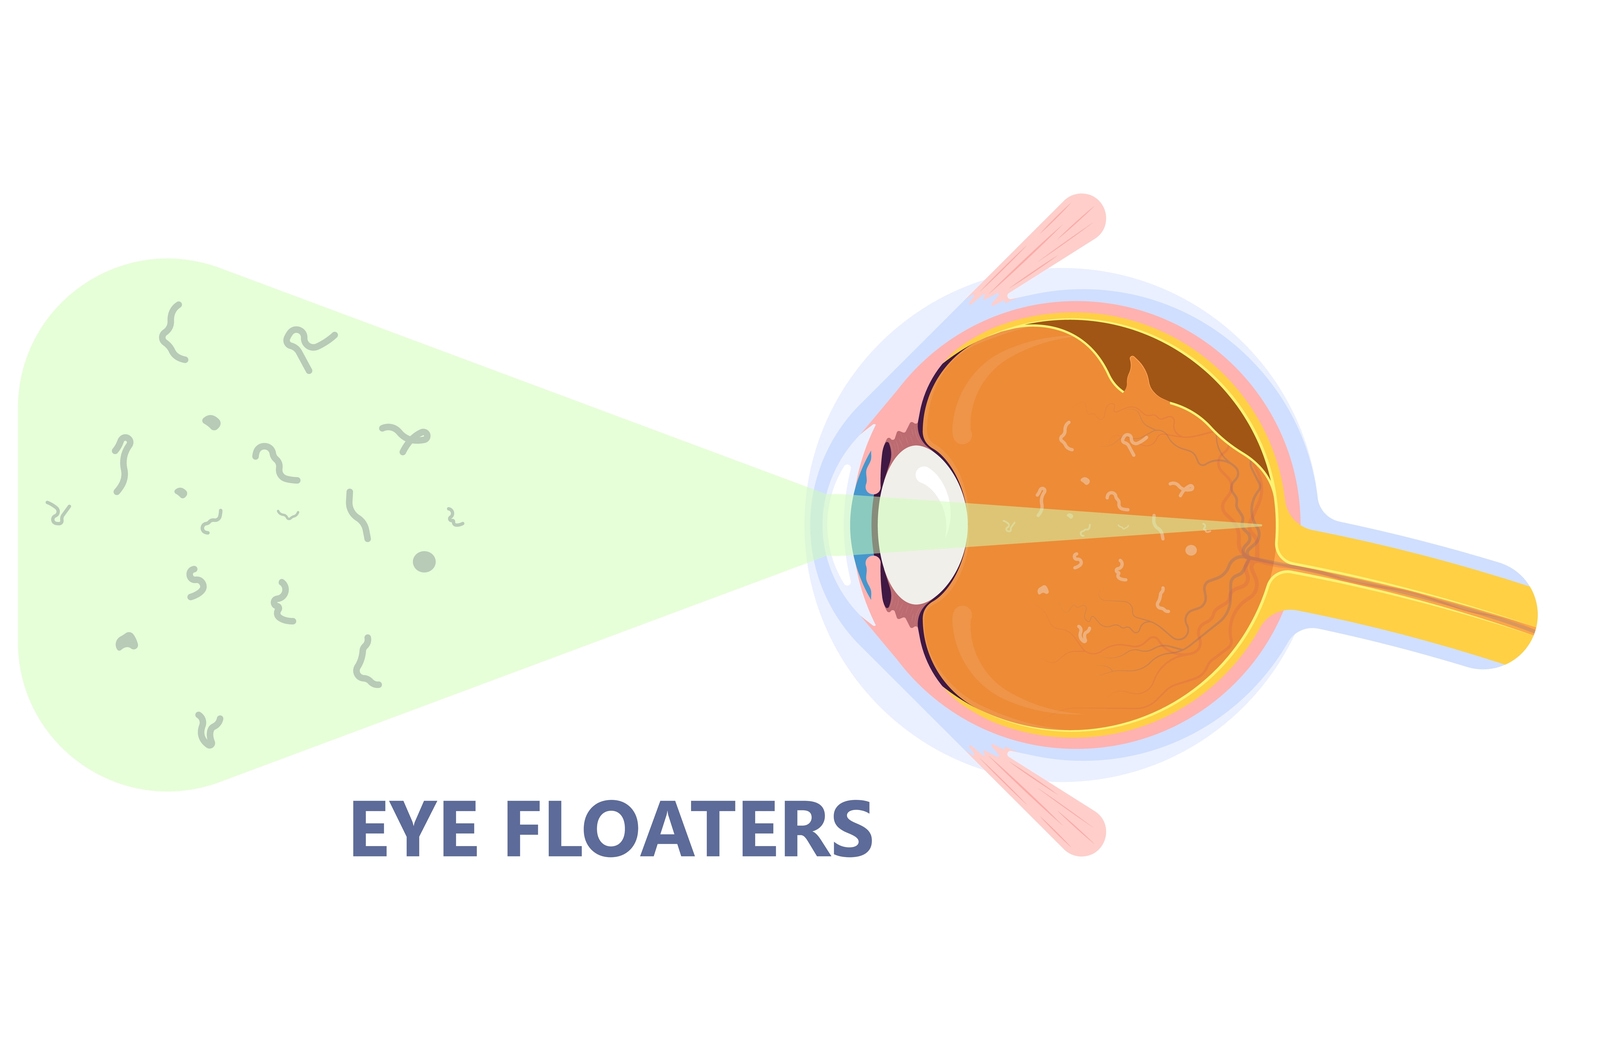 Graphical representation of eye floaters. A cross section of an eye with small floaters inside the vitreous fluid, is shown to project the floaters as what someone would see.